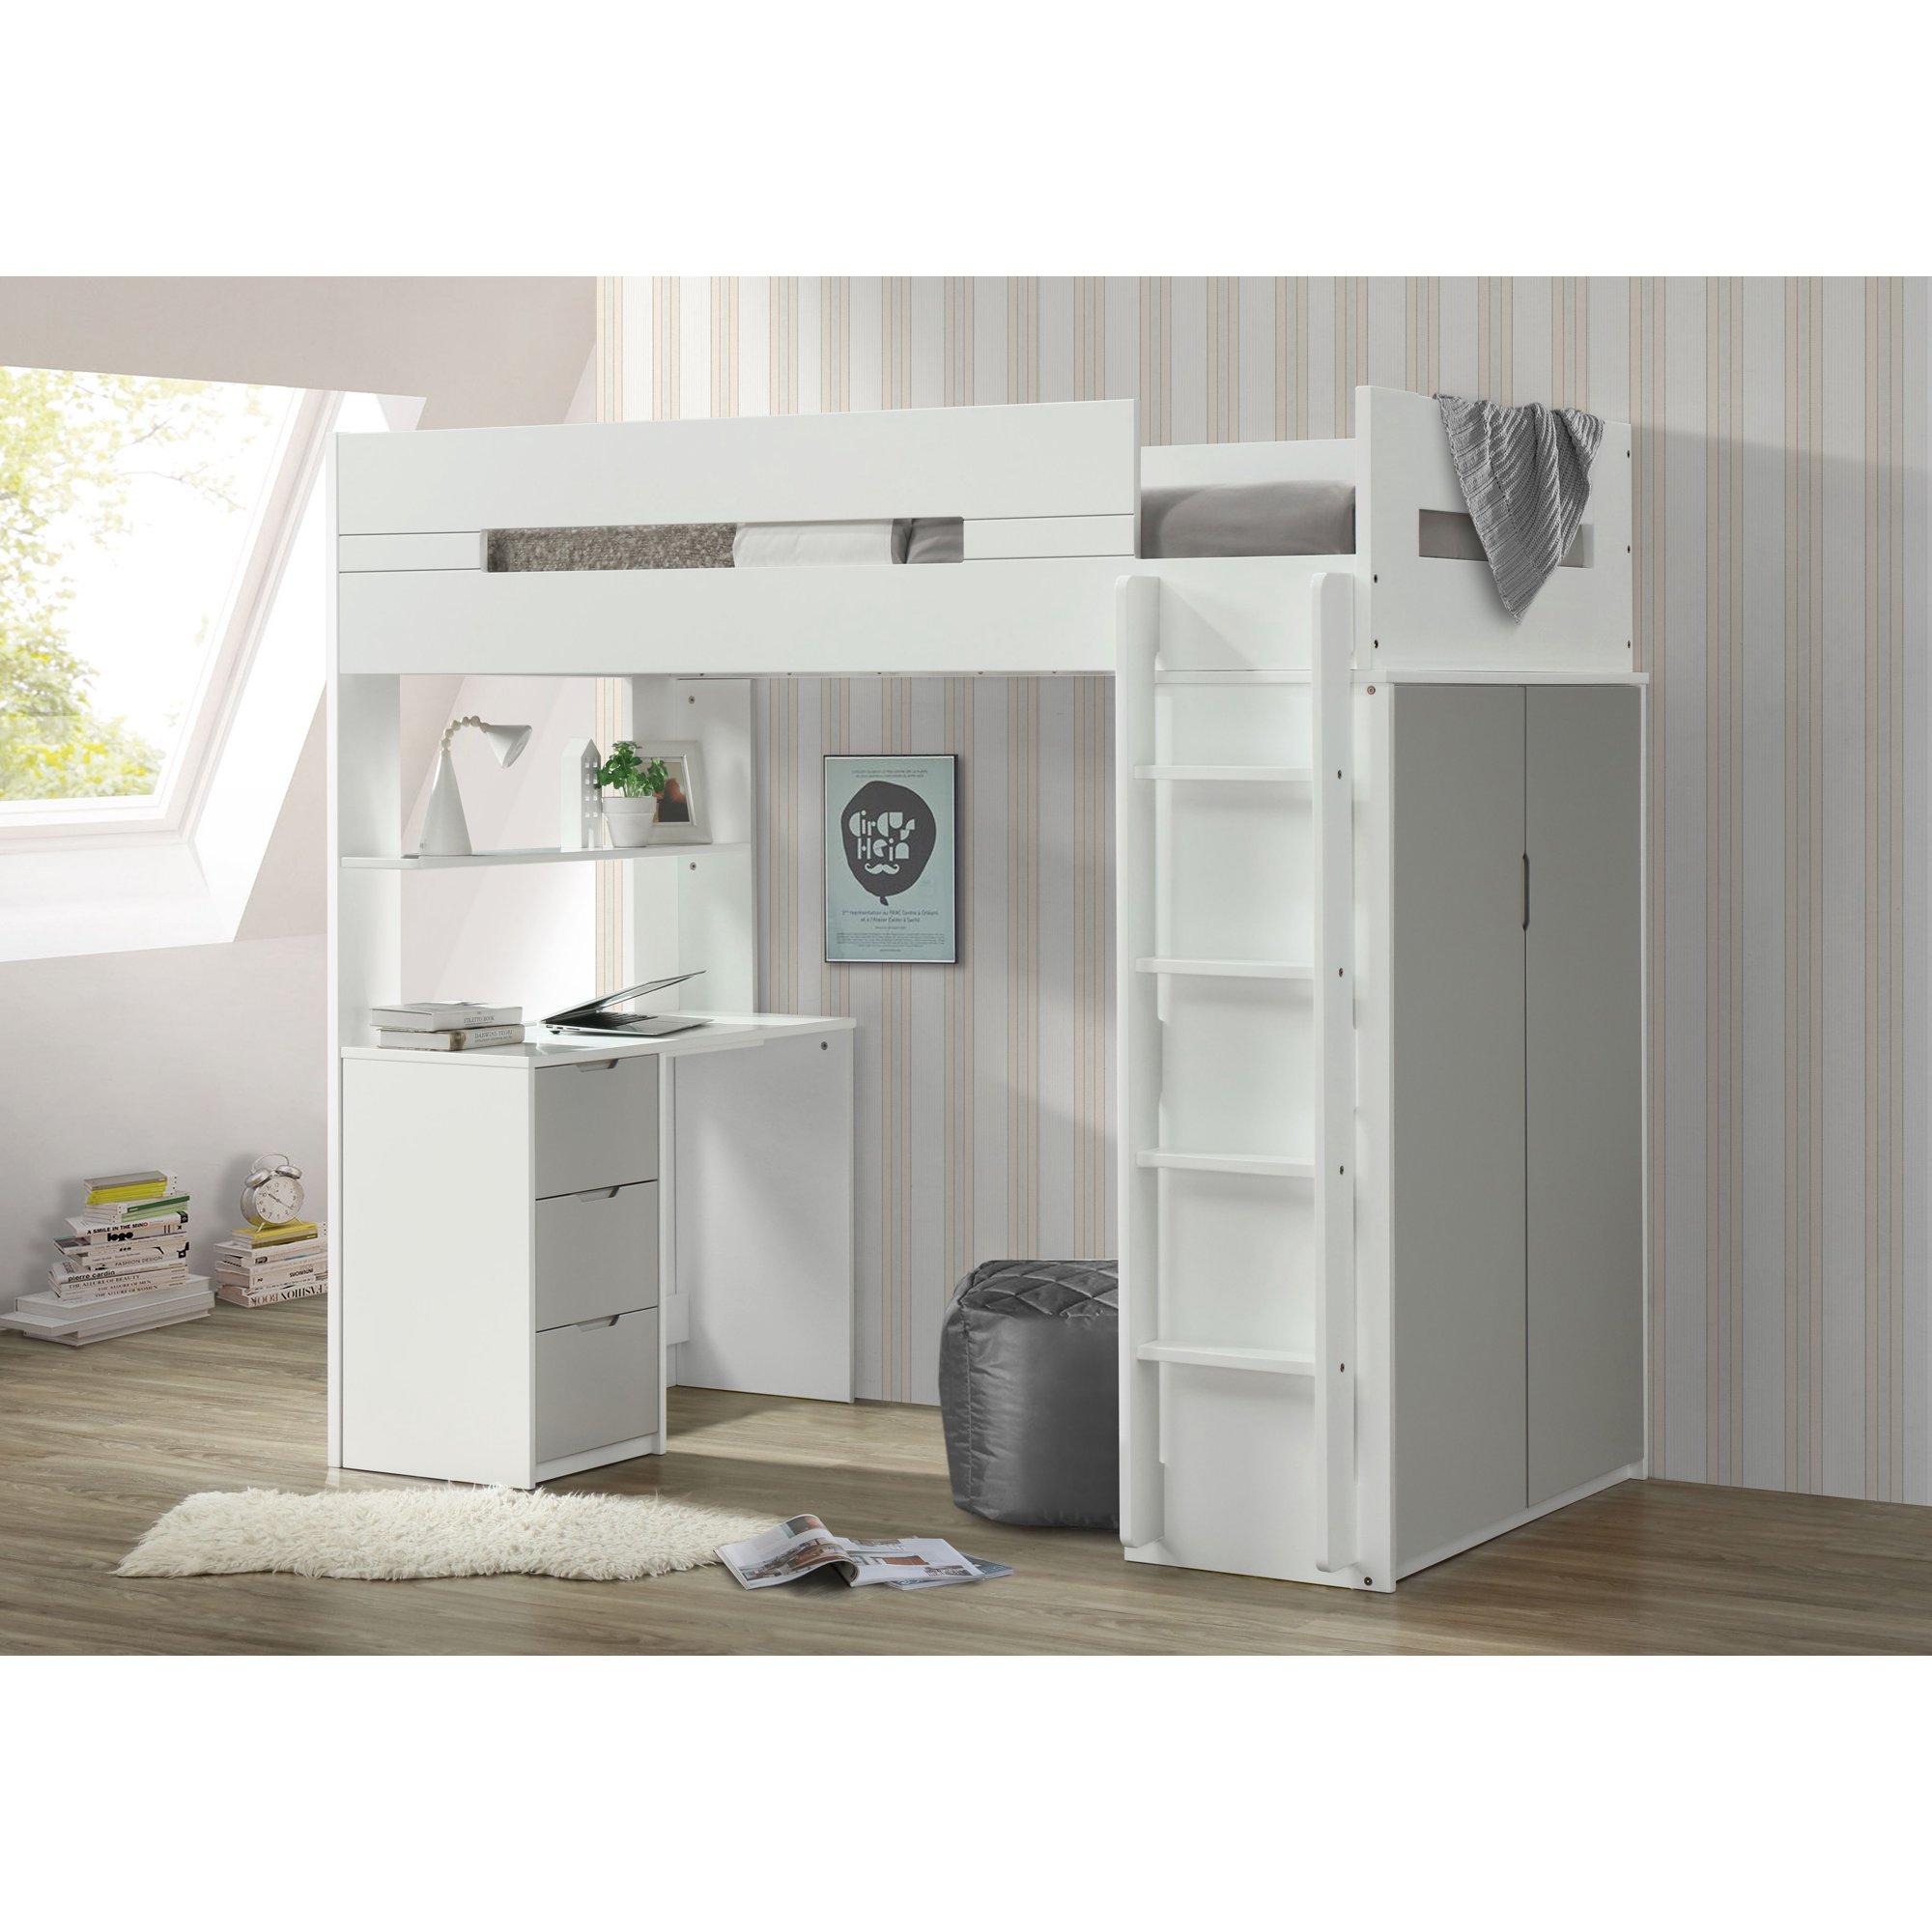 Transitional Loft Bed Nerice 38050 in Gray 